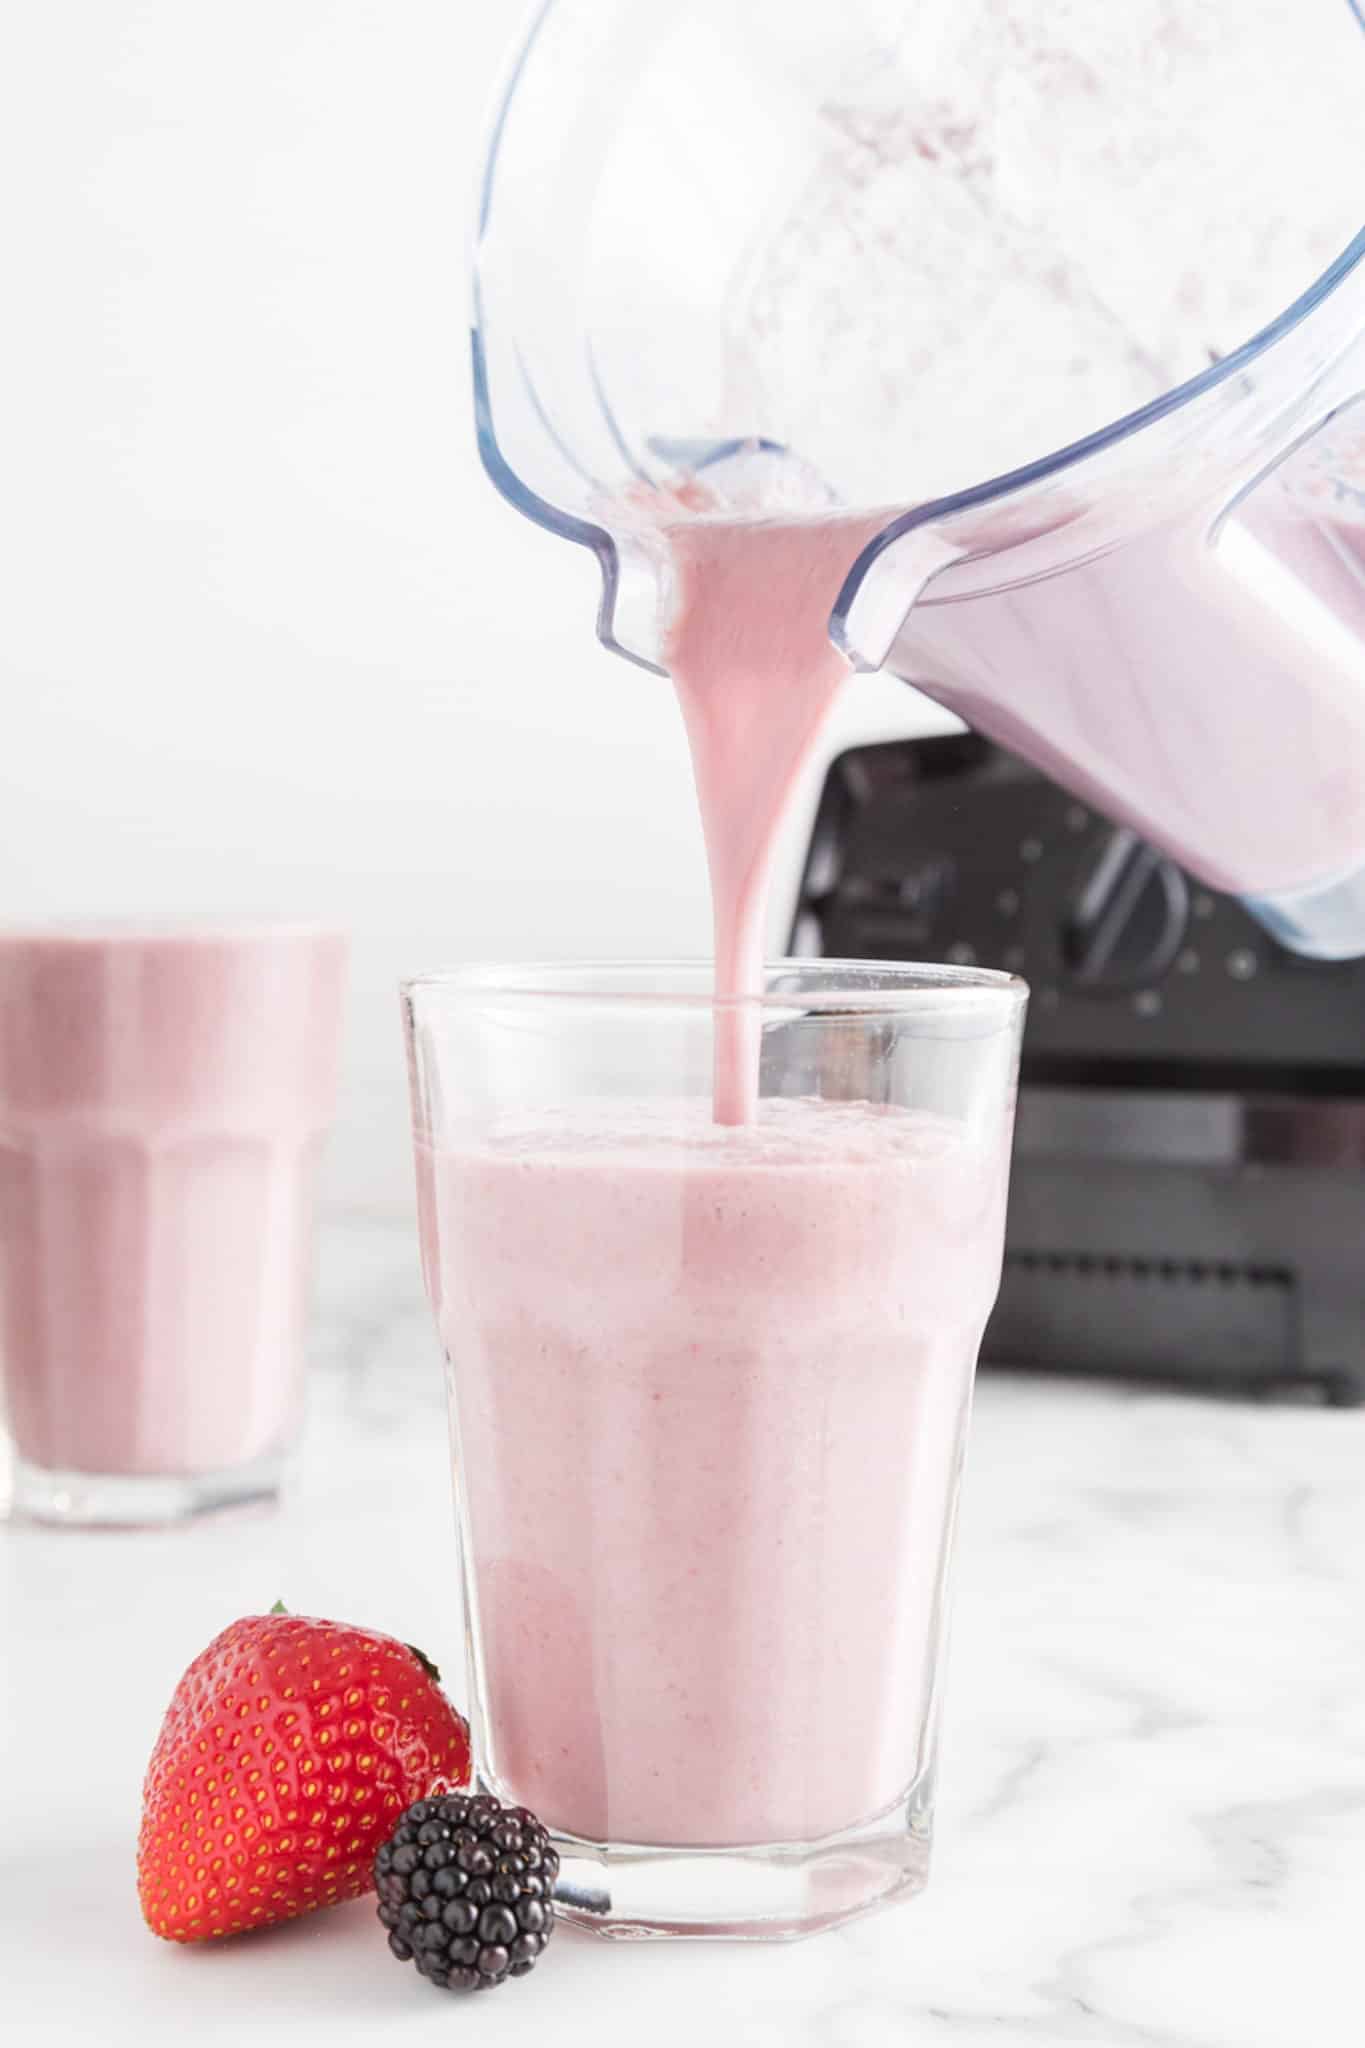 A blender jar pouring strawberry blackberry smoothie into a tall glass.